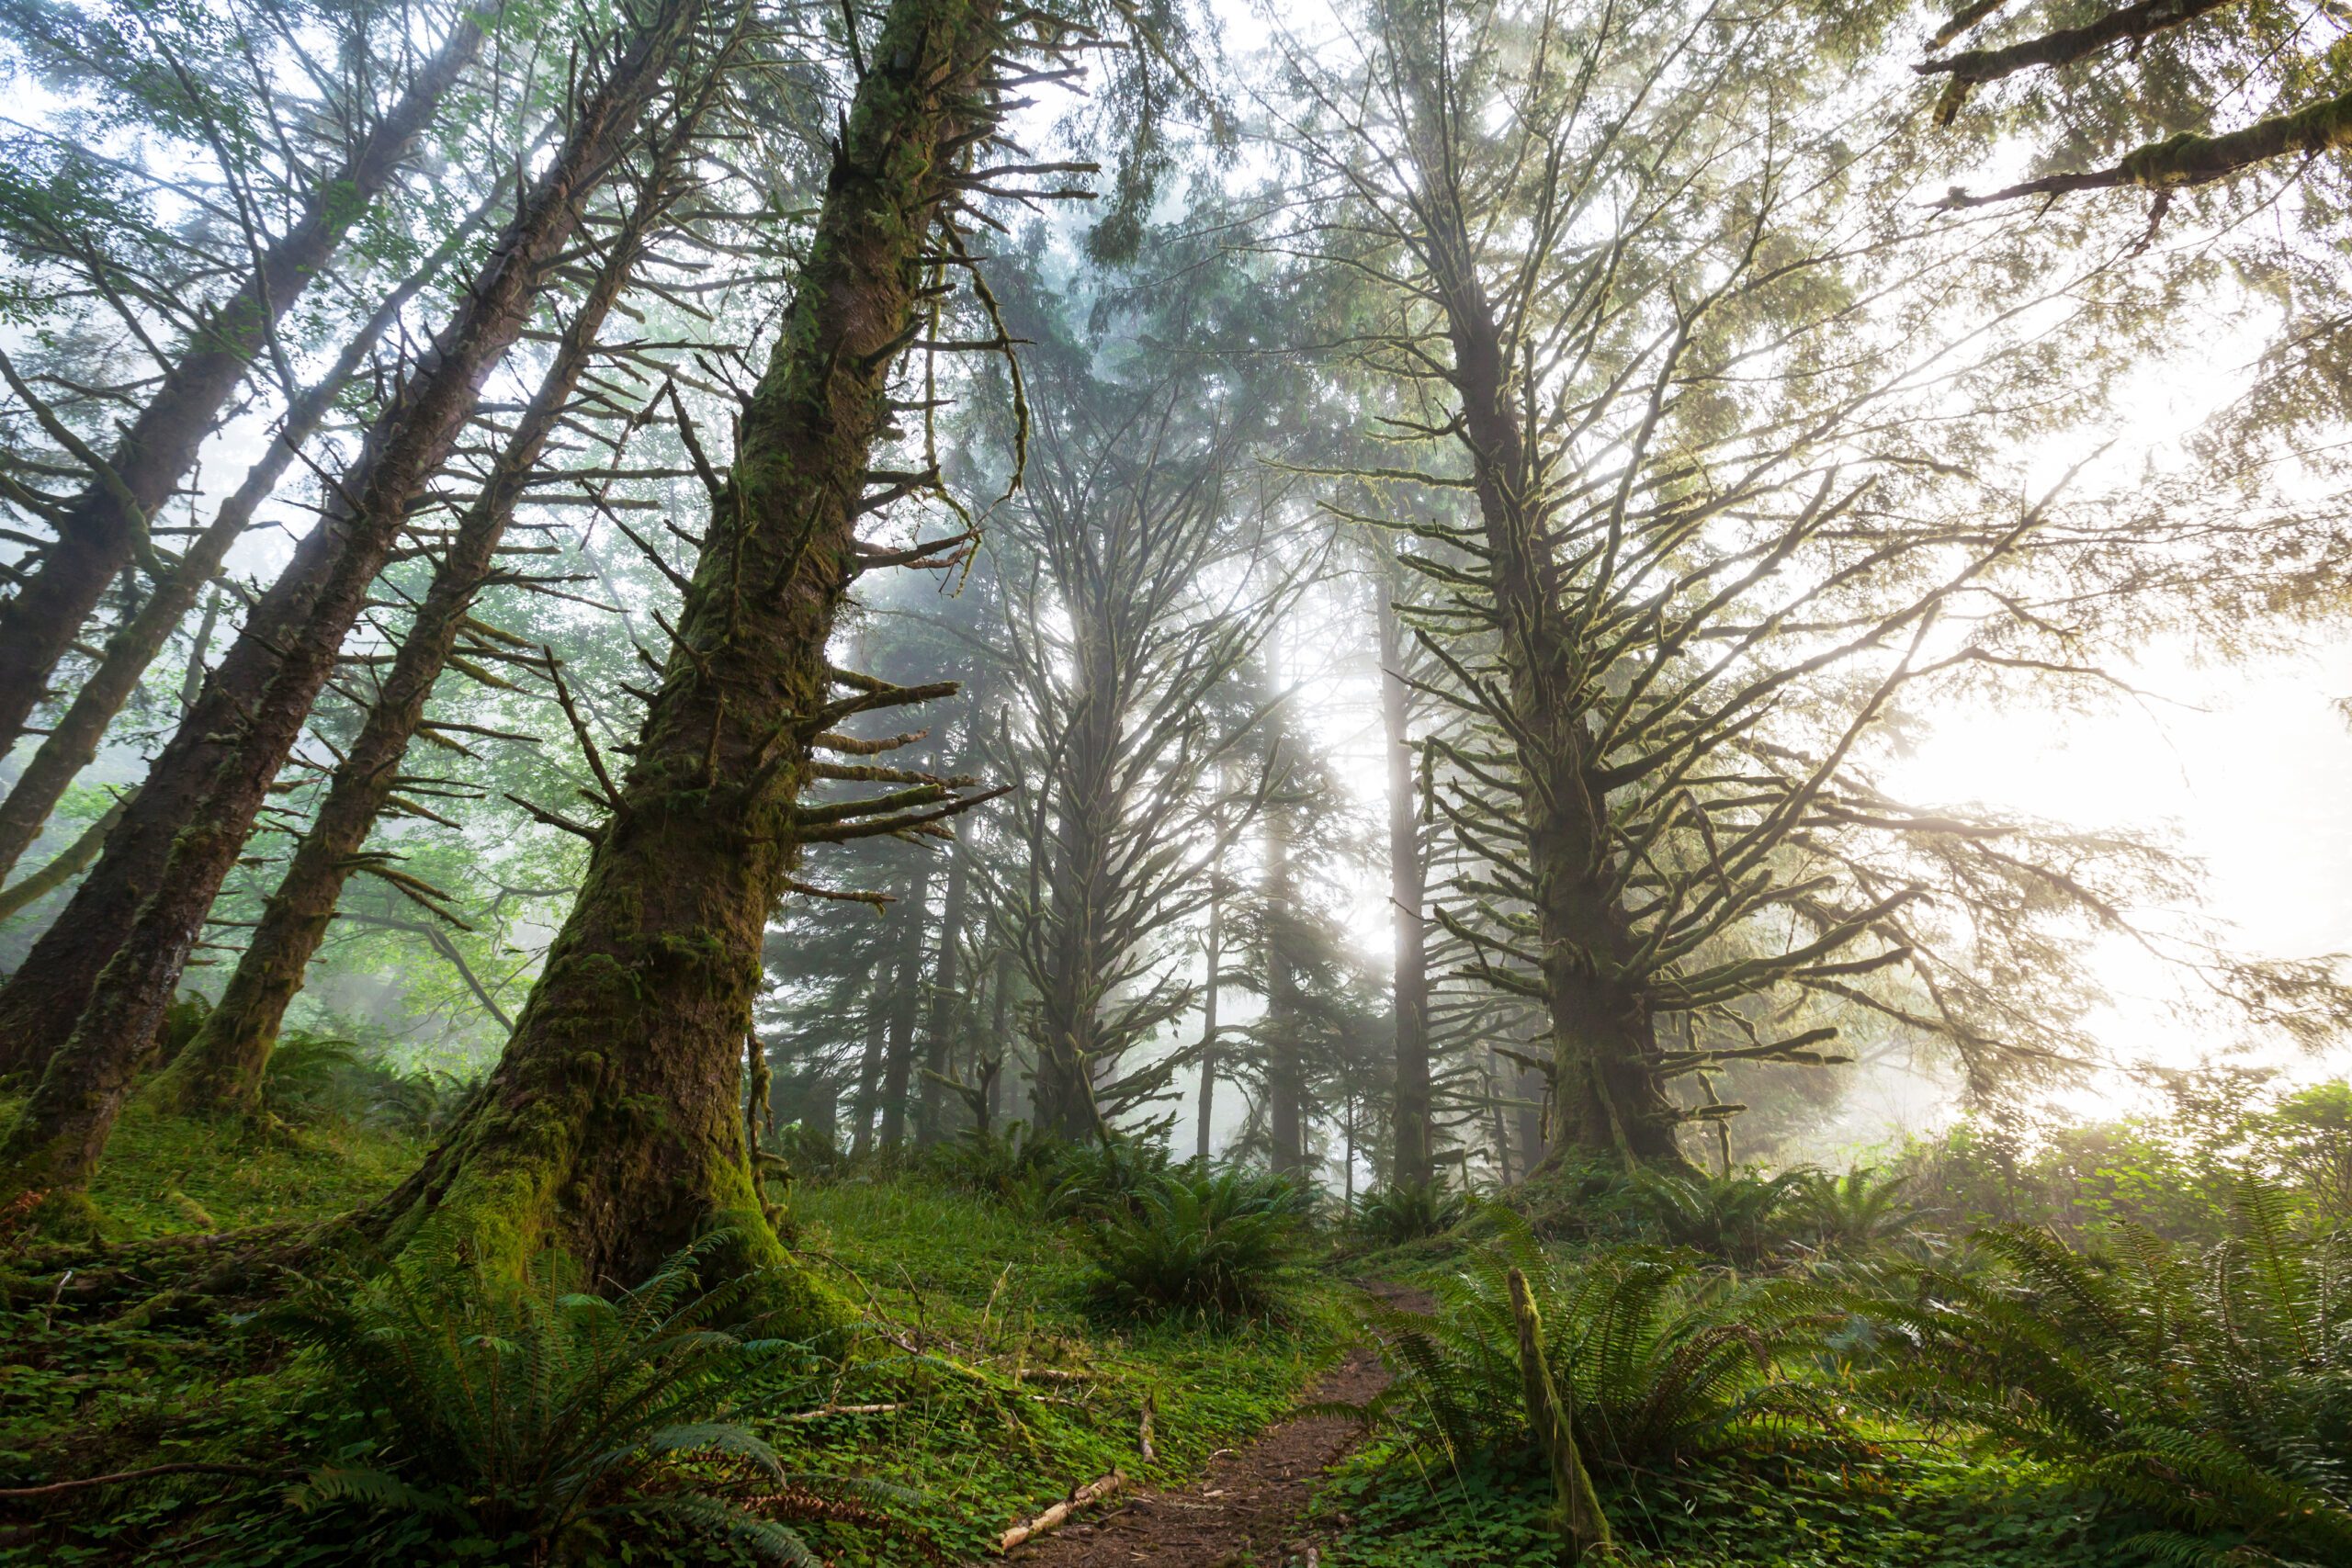 Photo of a foggy forest with tall trees and green ferns.